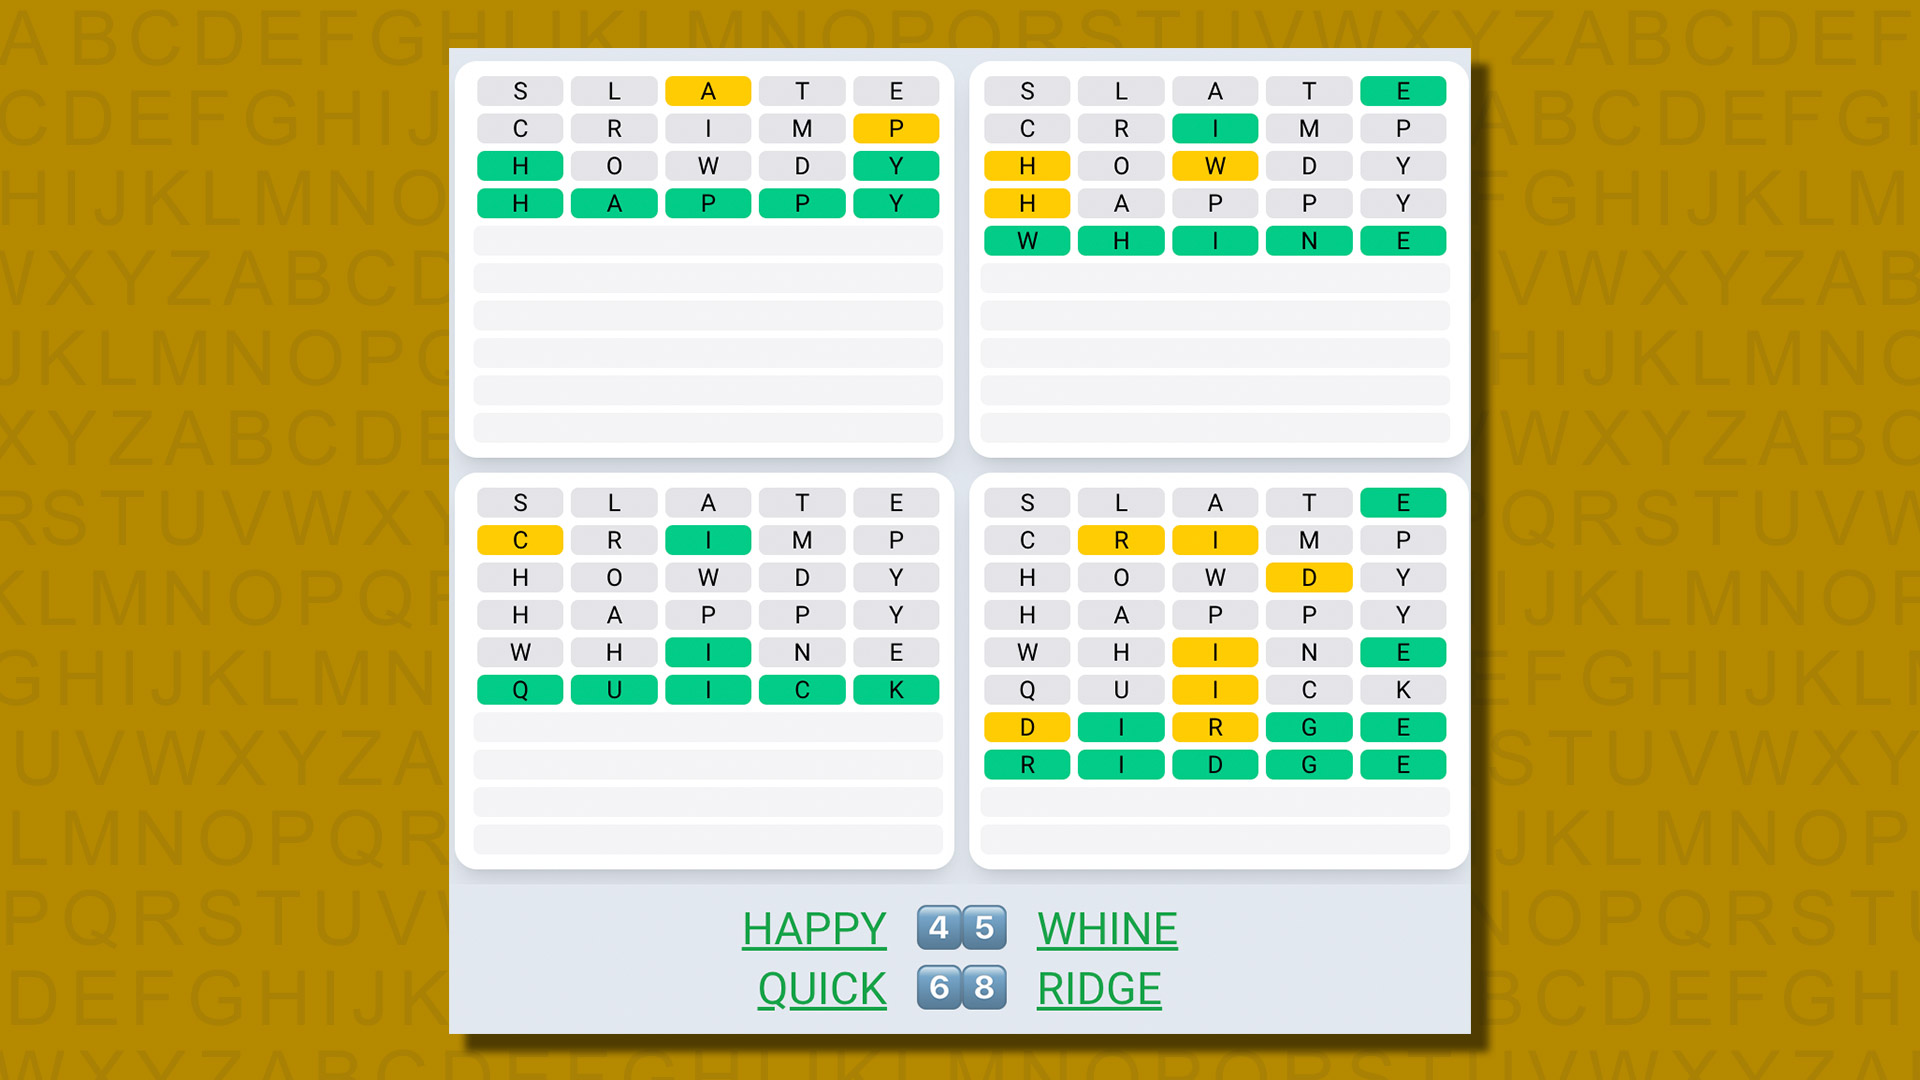 Quordle daily sequence answers for game 581 on a yellow background